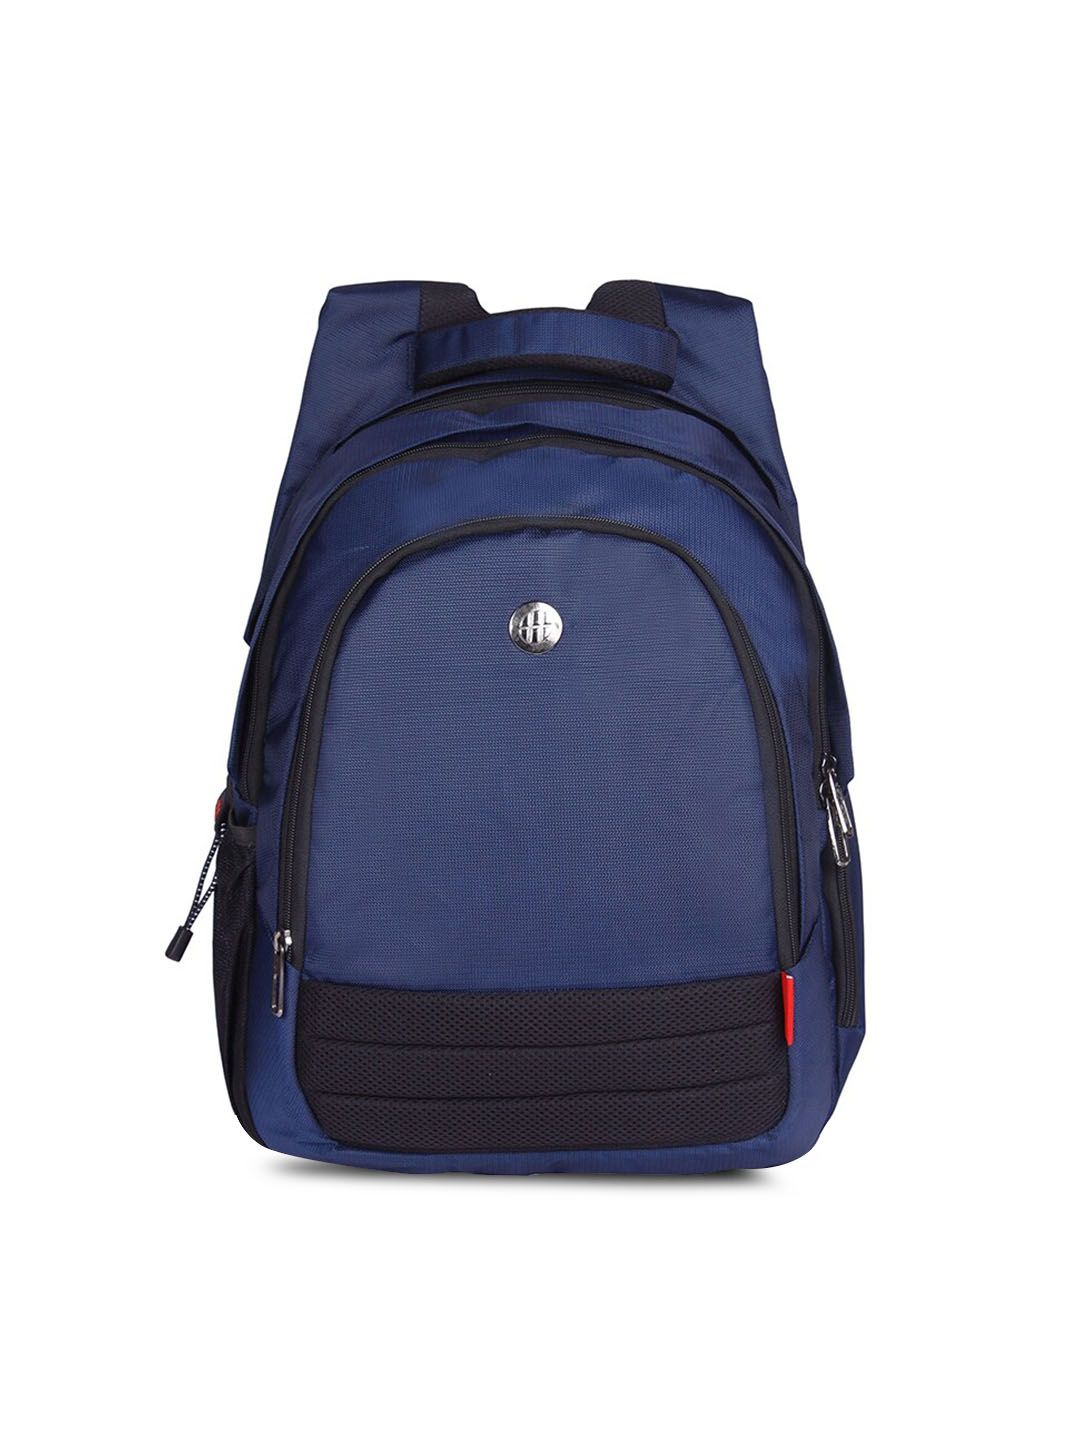 Harissons Navy Blue & Black Laptop Backpack Price in India